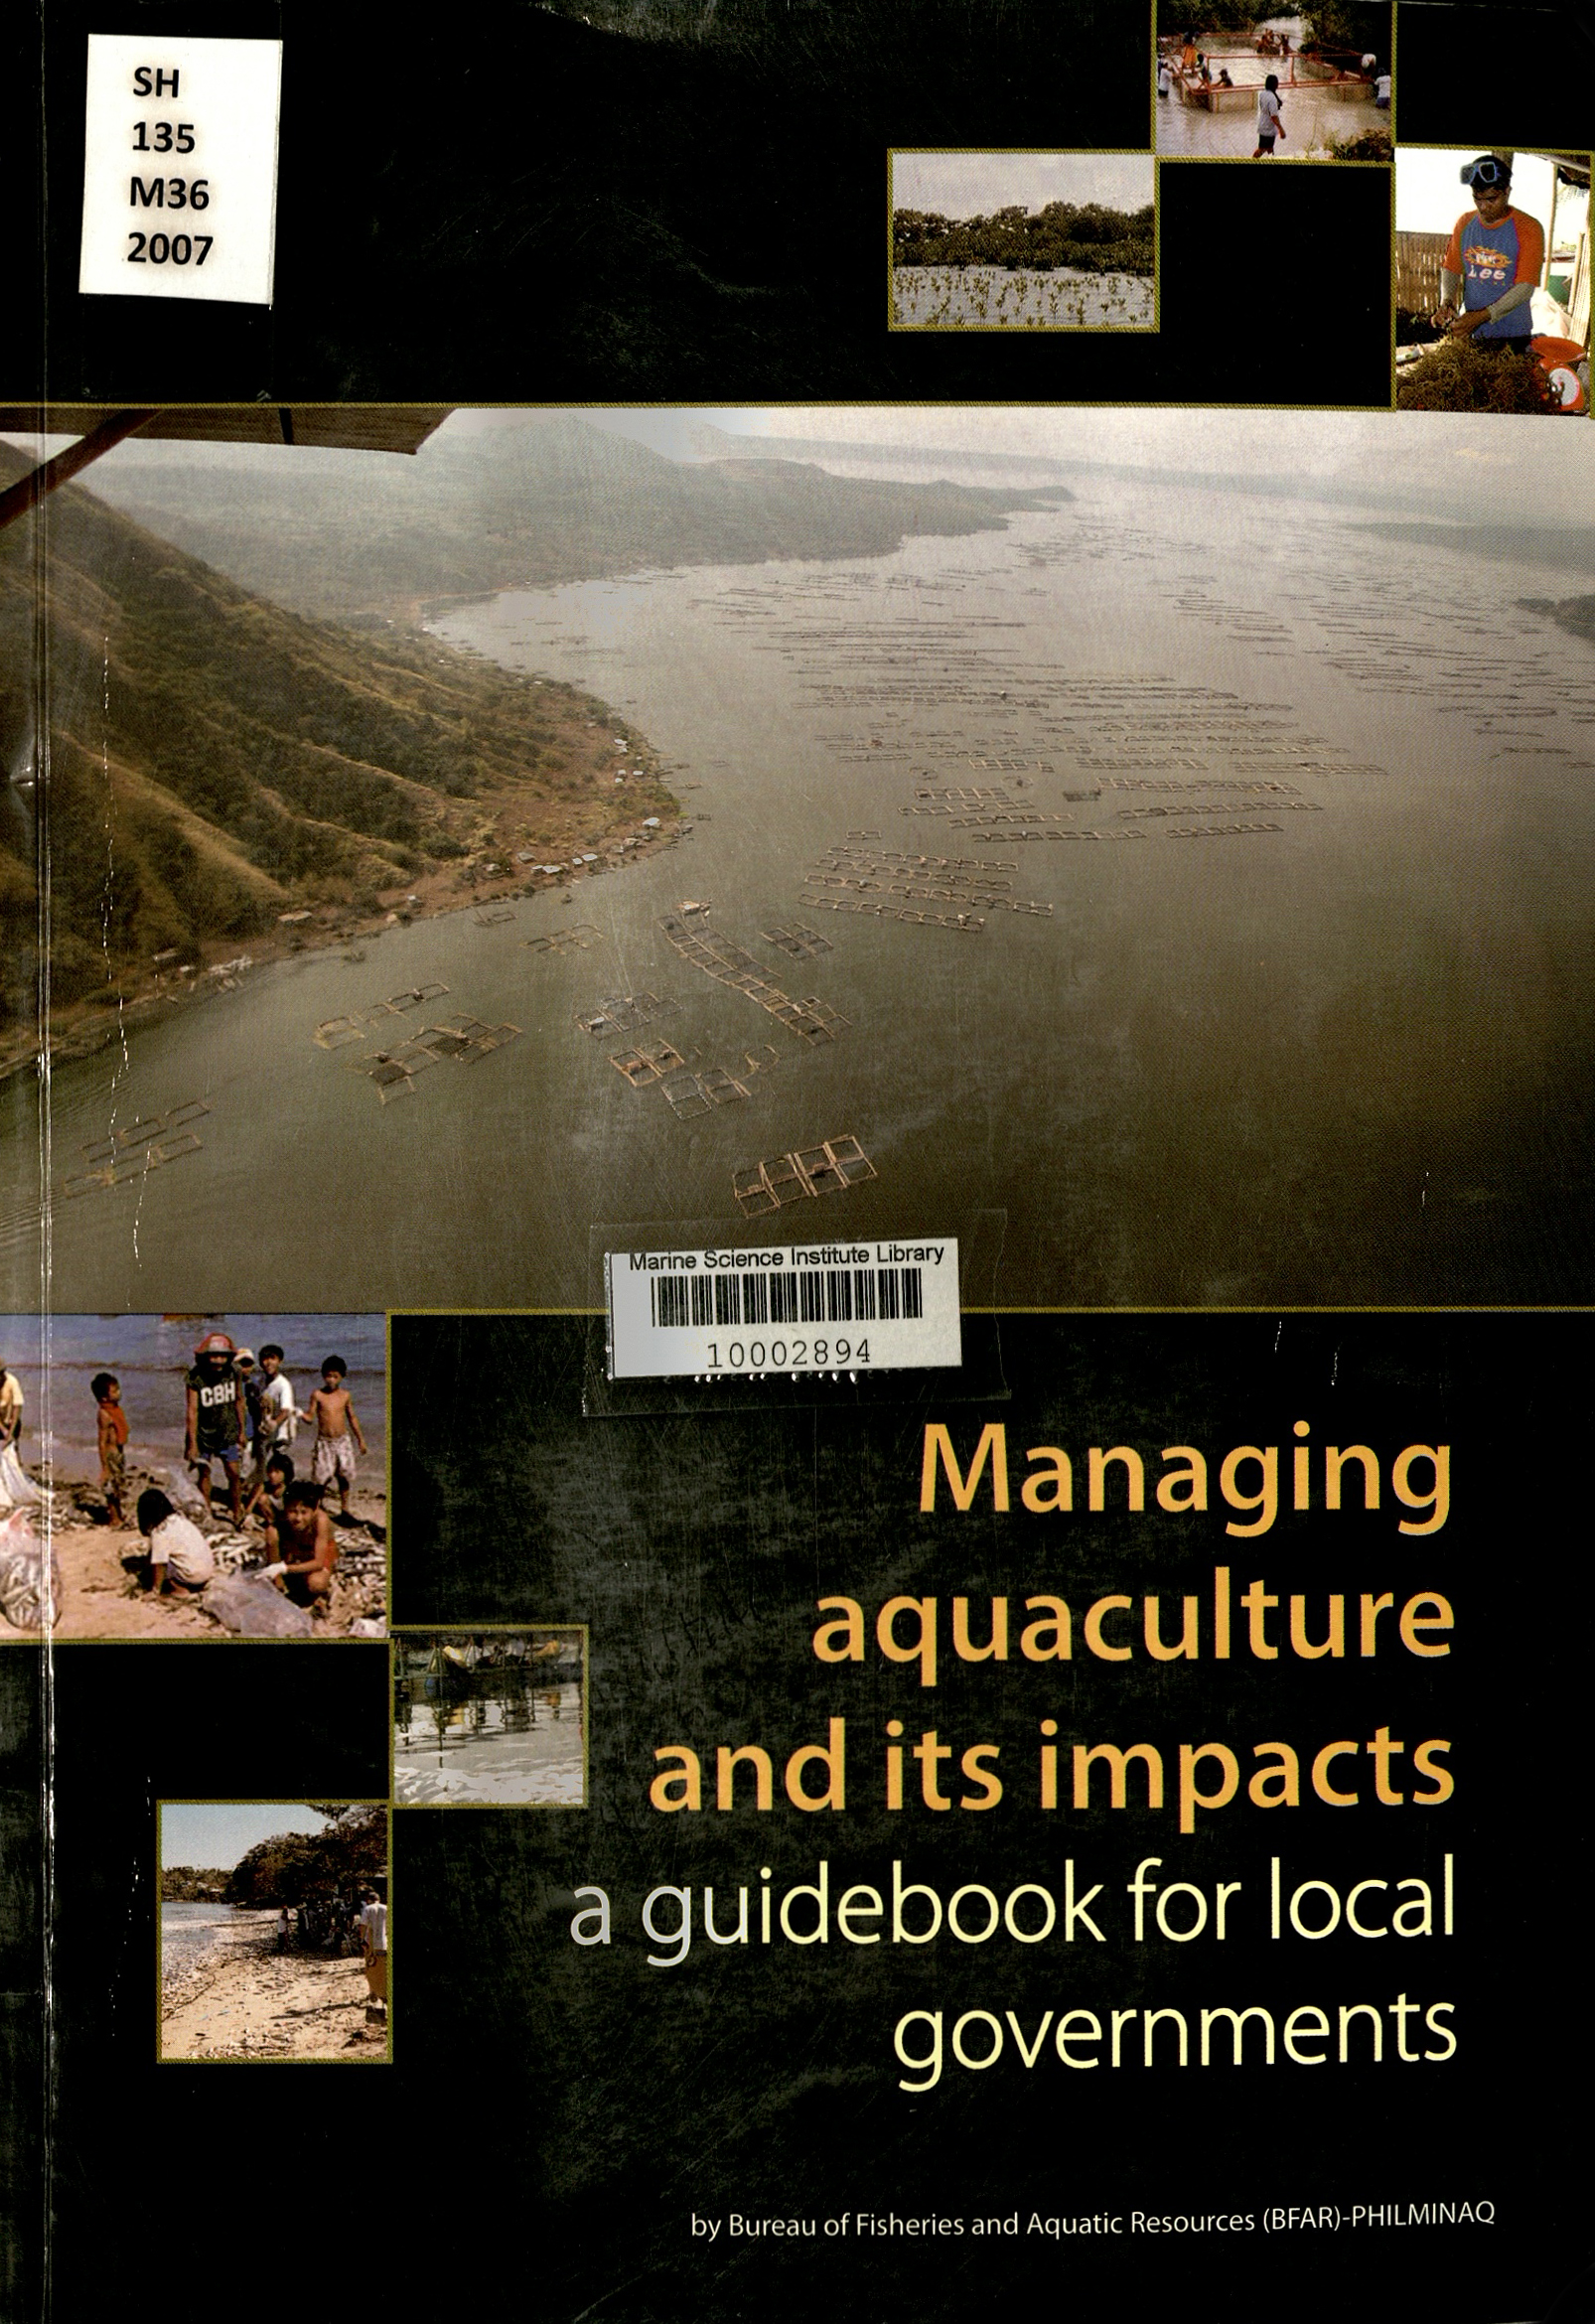 Managing aquaculture and its impacts a guidebook for local governments.